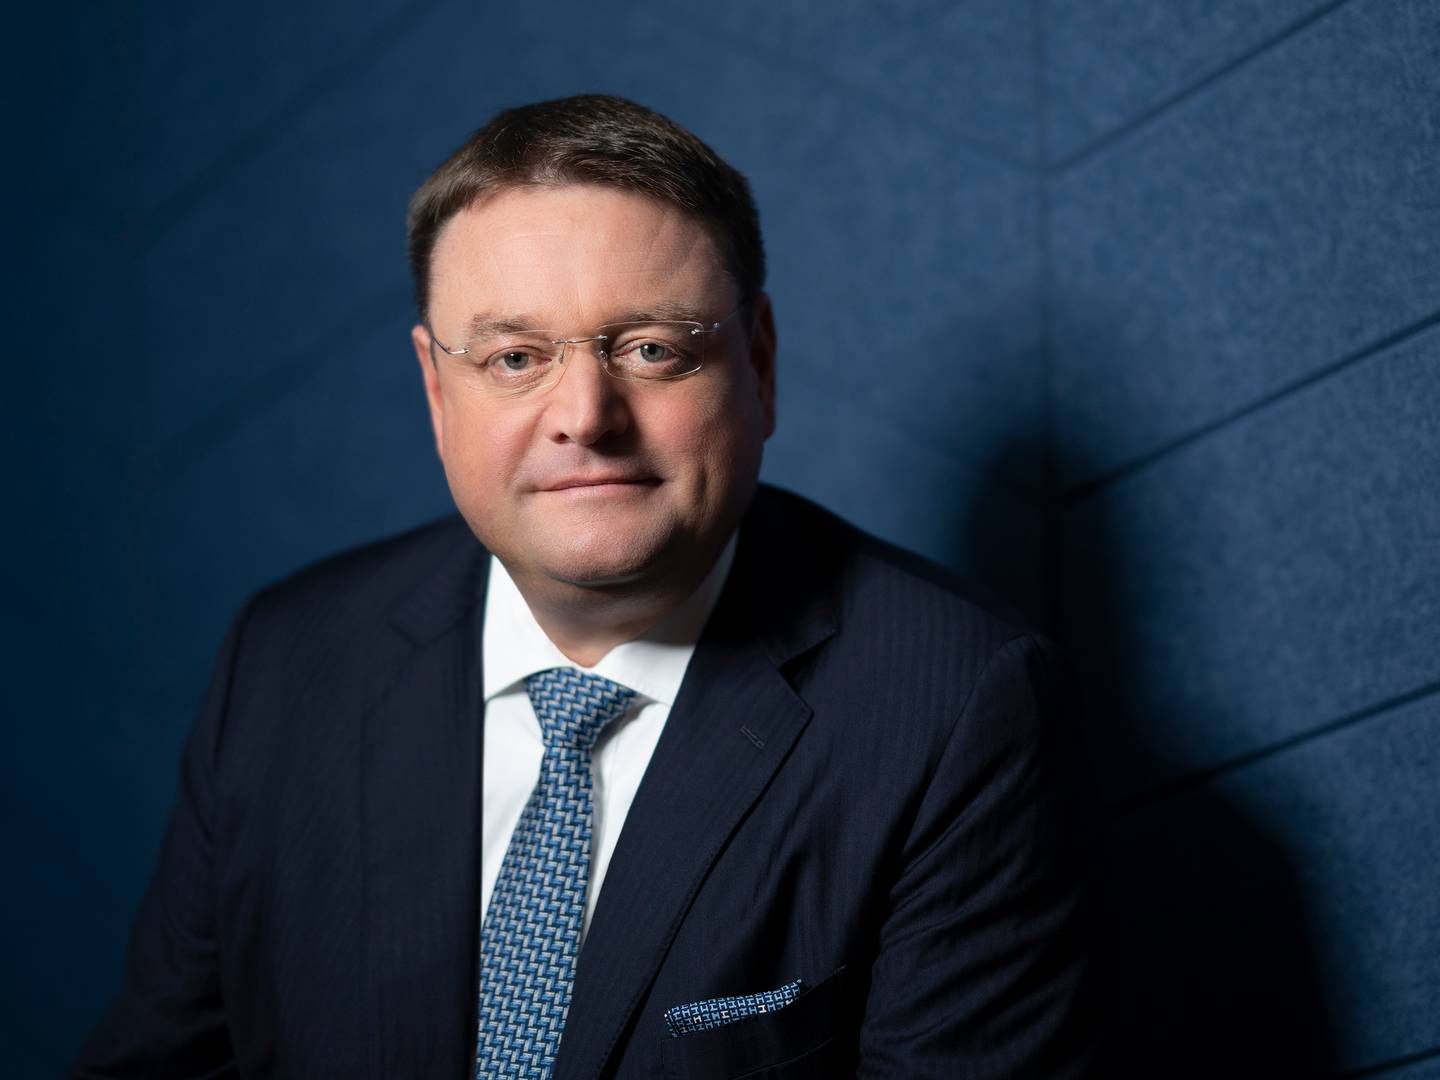 CEO Stefan Paul believes there are busy times ahead for Kuehne+Nagel, which will contribute positively to the freight forwarder's financial performance.